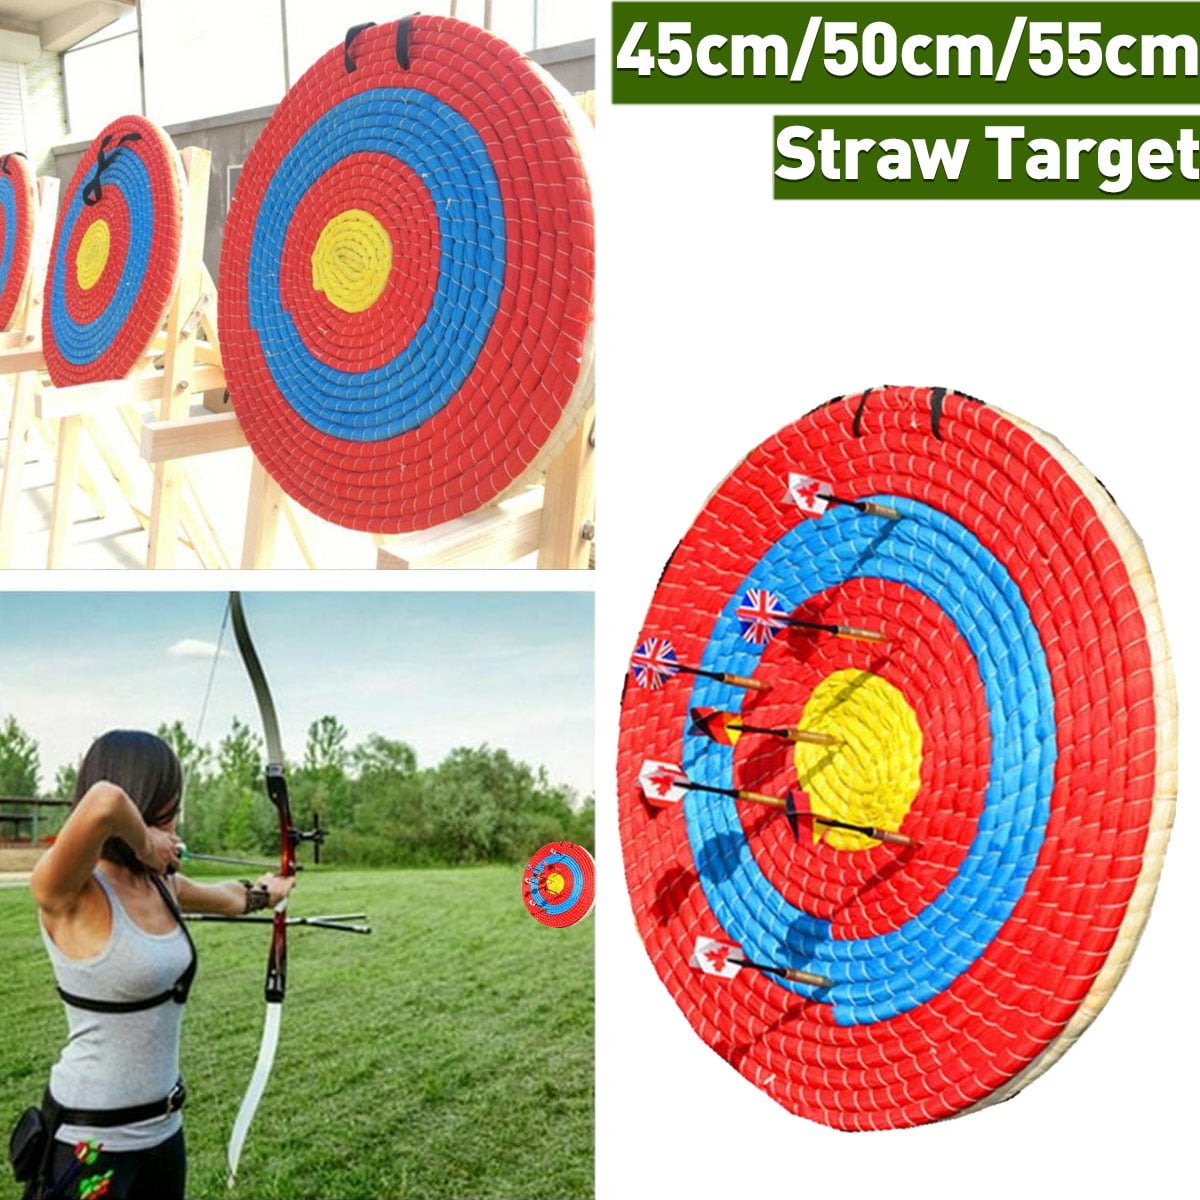 Archery Shooting Targets Compound or Recurve Targets 